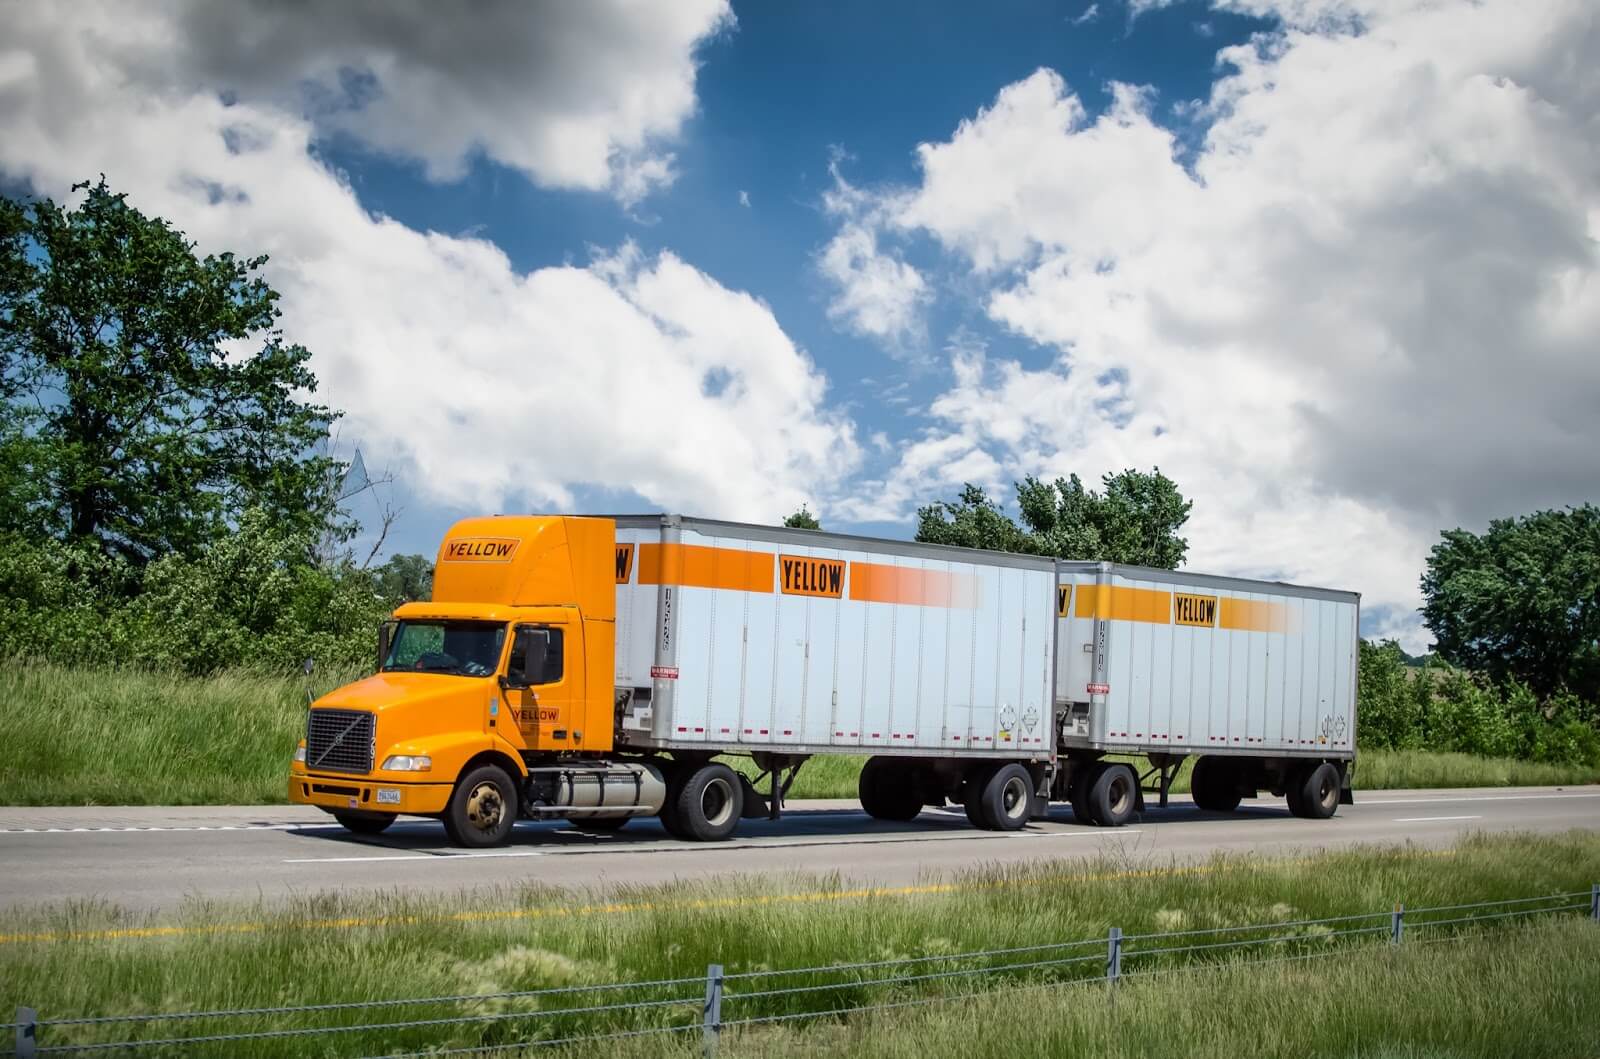 Teamsters Union Bold Move: Risking 22,000 Trucking Jobs Amid Yellow’s Financial Crisis